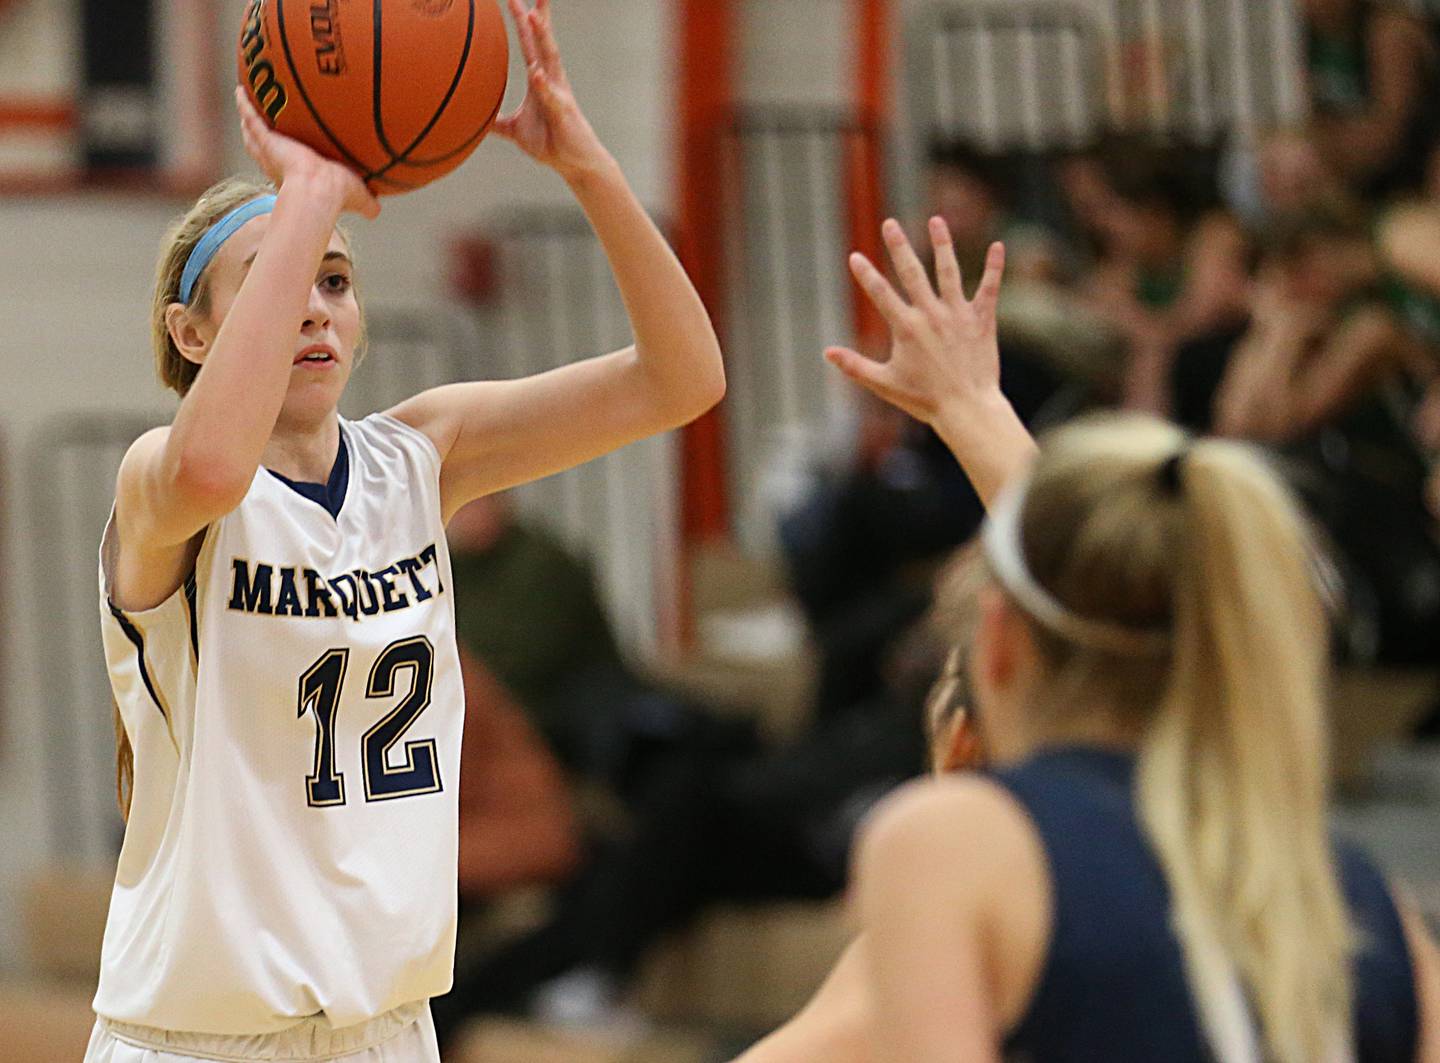 Marquette's Lilly Craig shoots a jump shot over Fieldcrest in the Integrated Seed Lady Falcon Basketball Classic on Thursday, Nov. 17, 2022 in Flanagan.